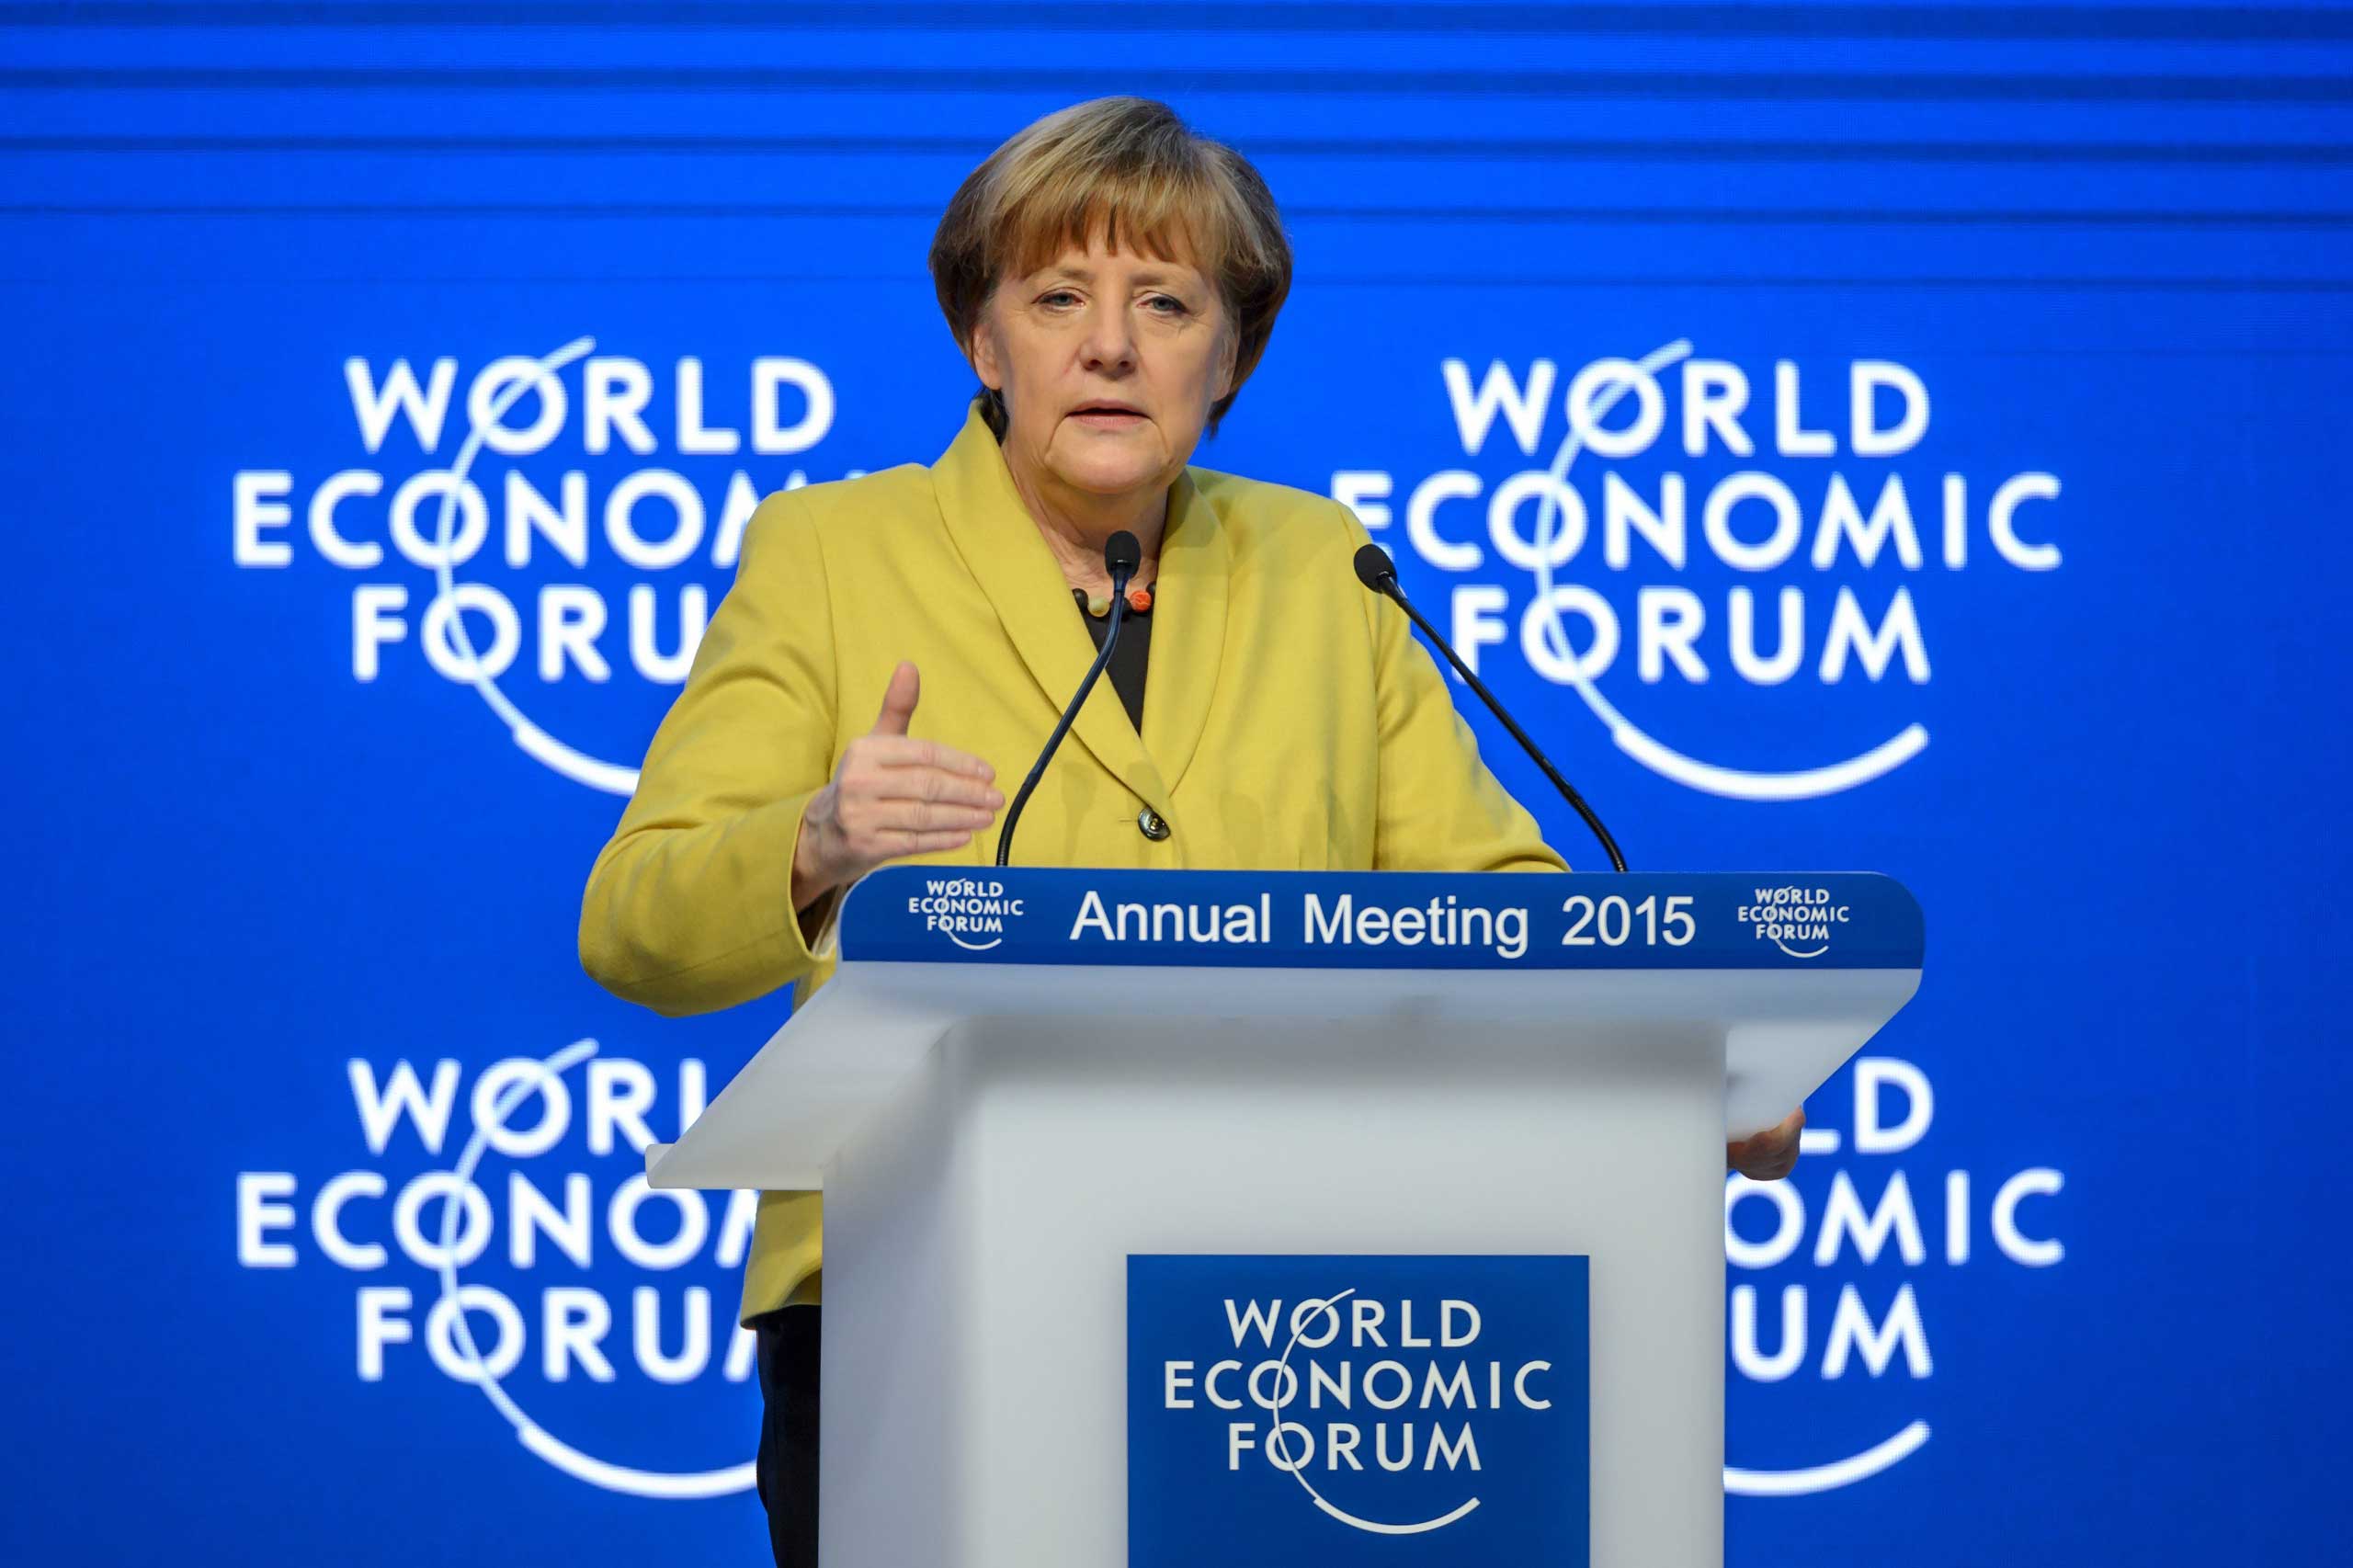 German Chancellor Angela Merkel attends a session of the World Economic Forum (WEF) annual meeting on Jan. 22, 2015 in Davos.